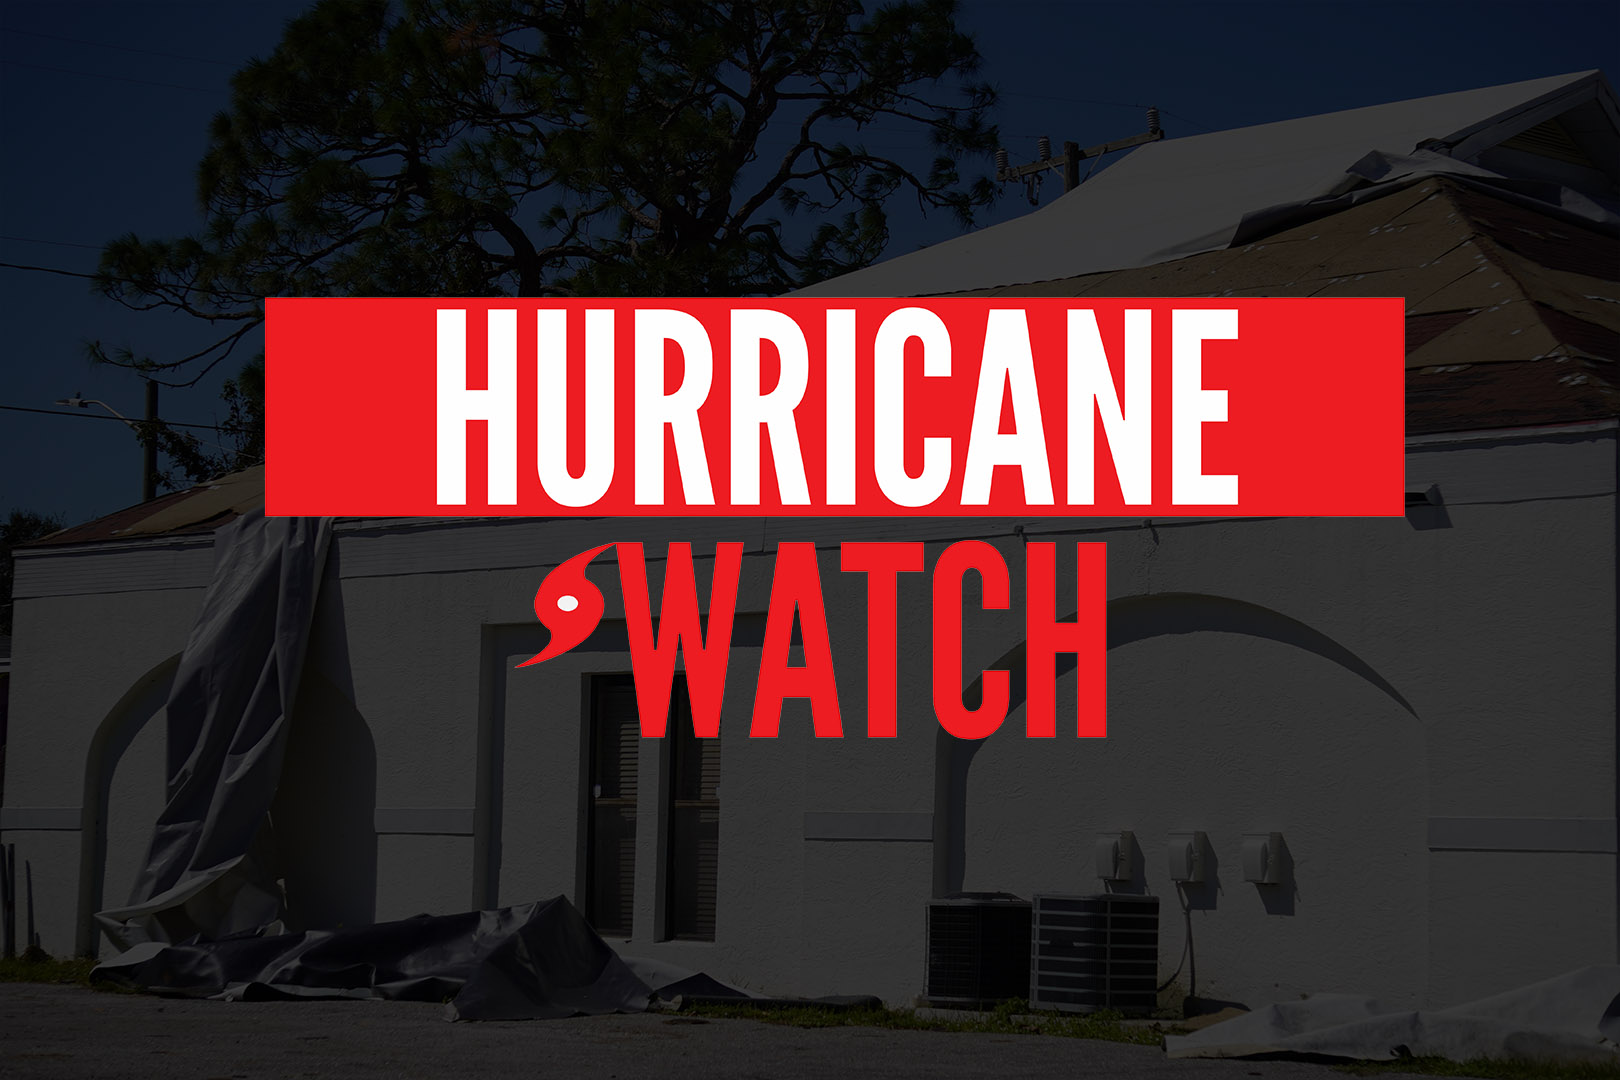 Parts of Florida are under a hurricane watch